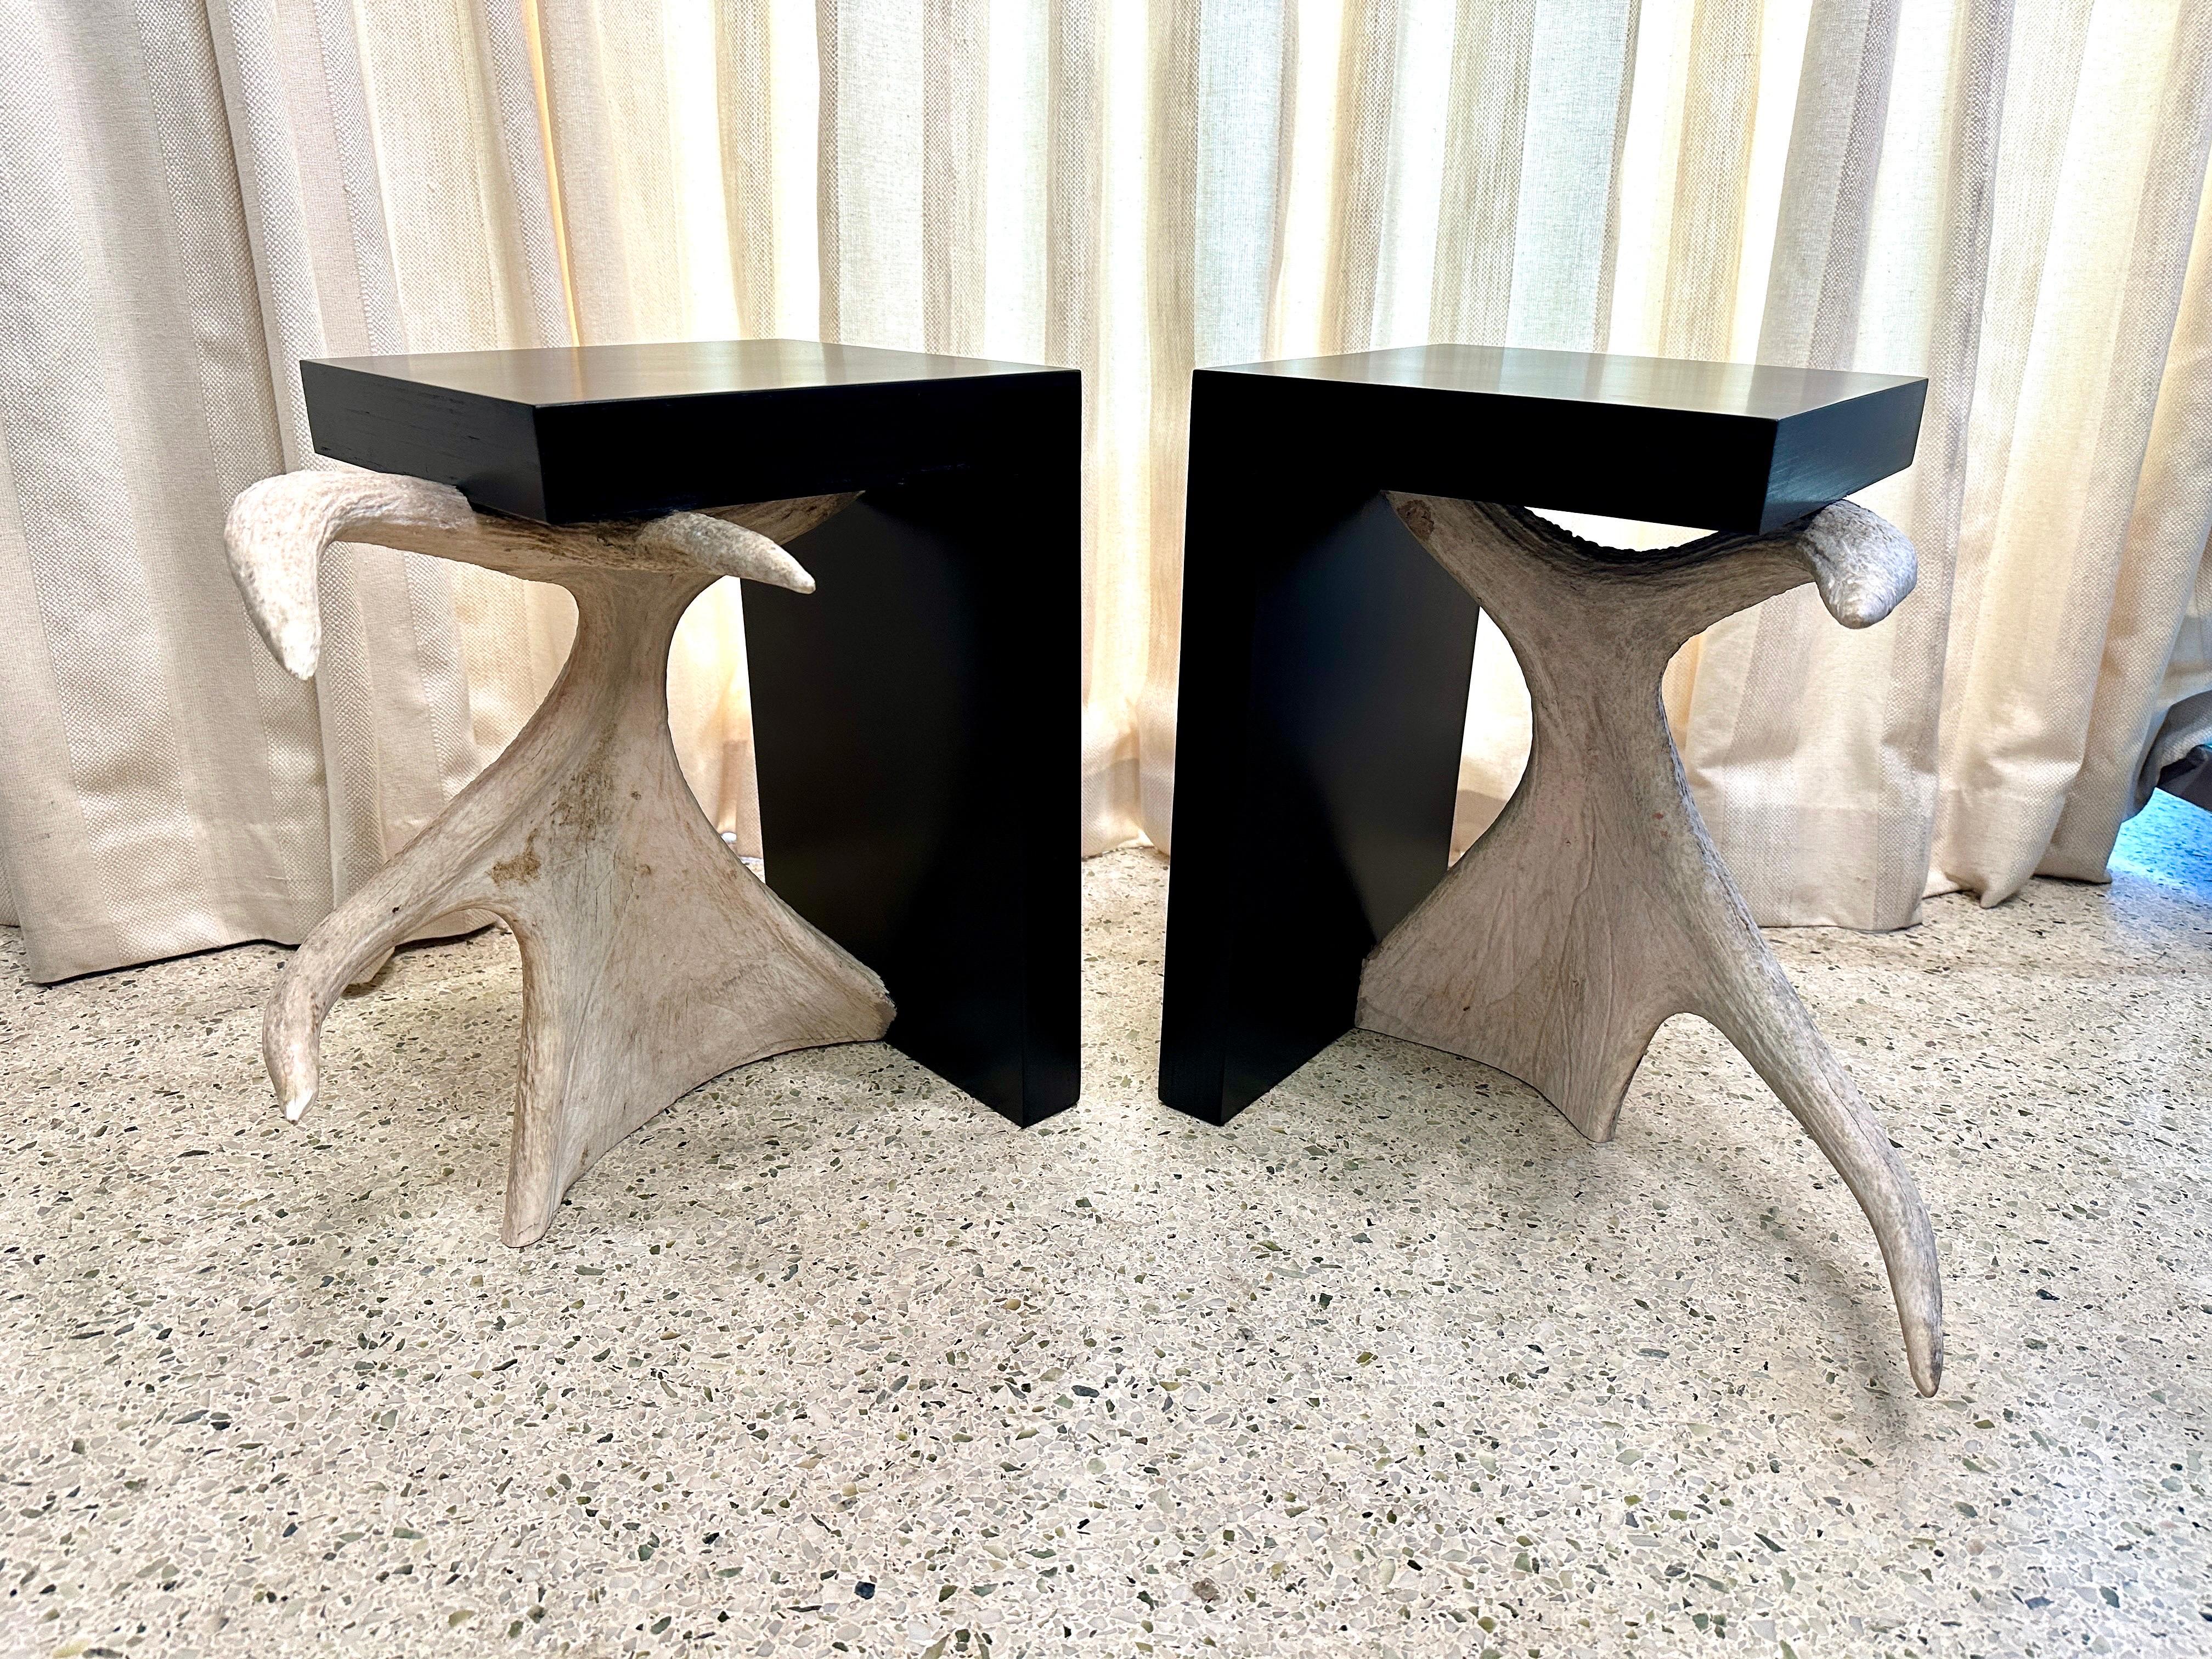 These wonderfully whimsical original custom tables/ stools in 